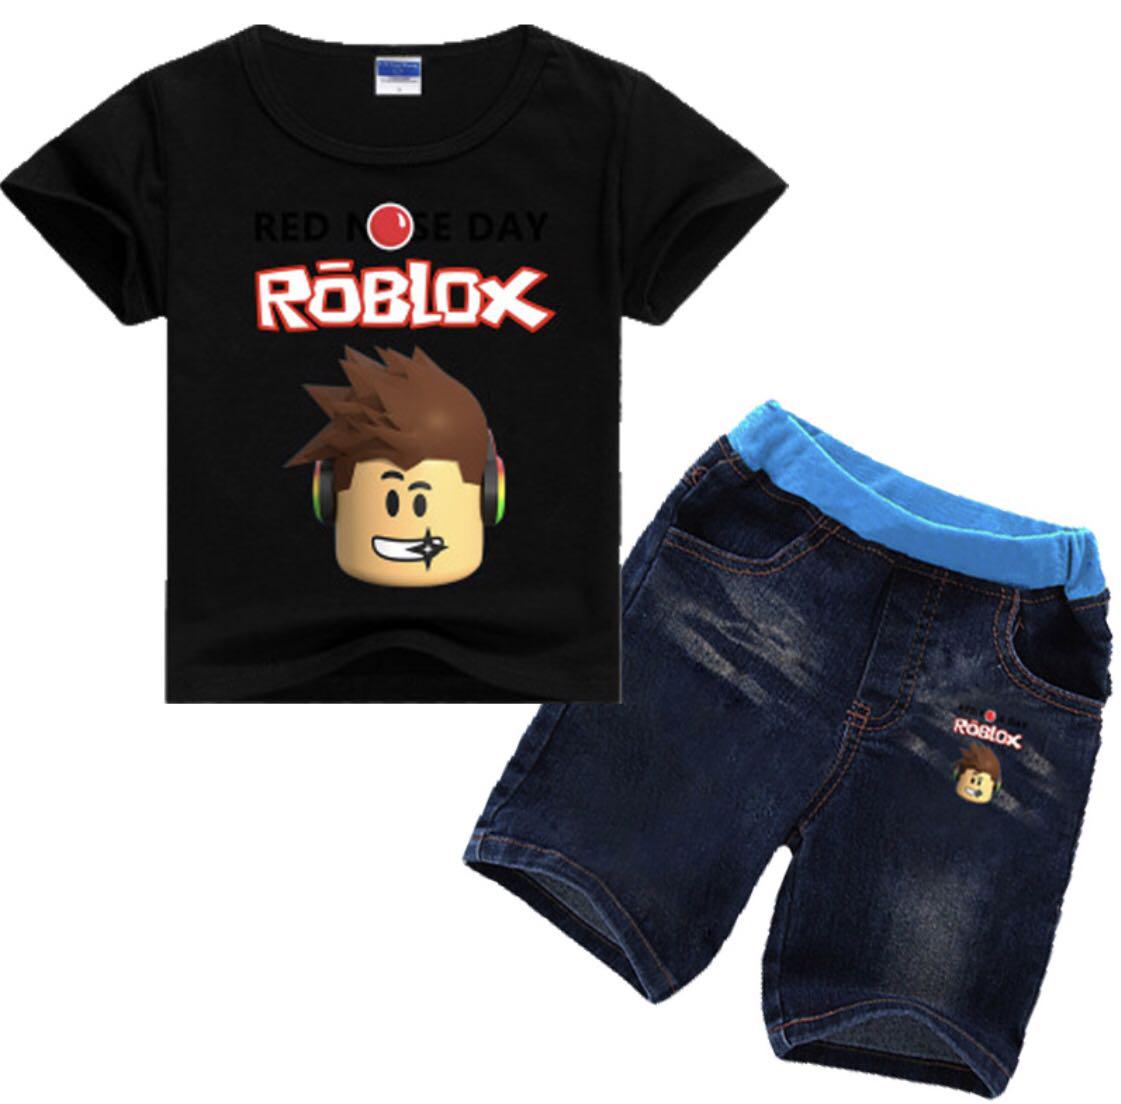 Bn Roblox Shirt Pants Set Size 135 140 Babies Kids Boys Apparel 4 To 7 Years On Carousell - roblox shirt size 7